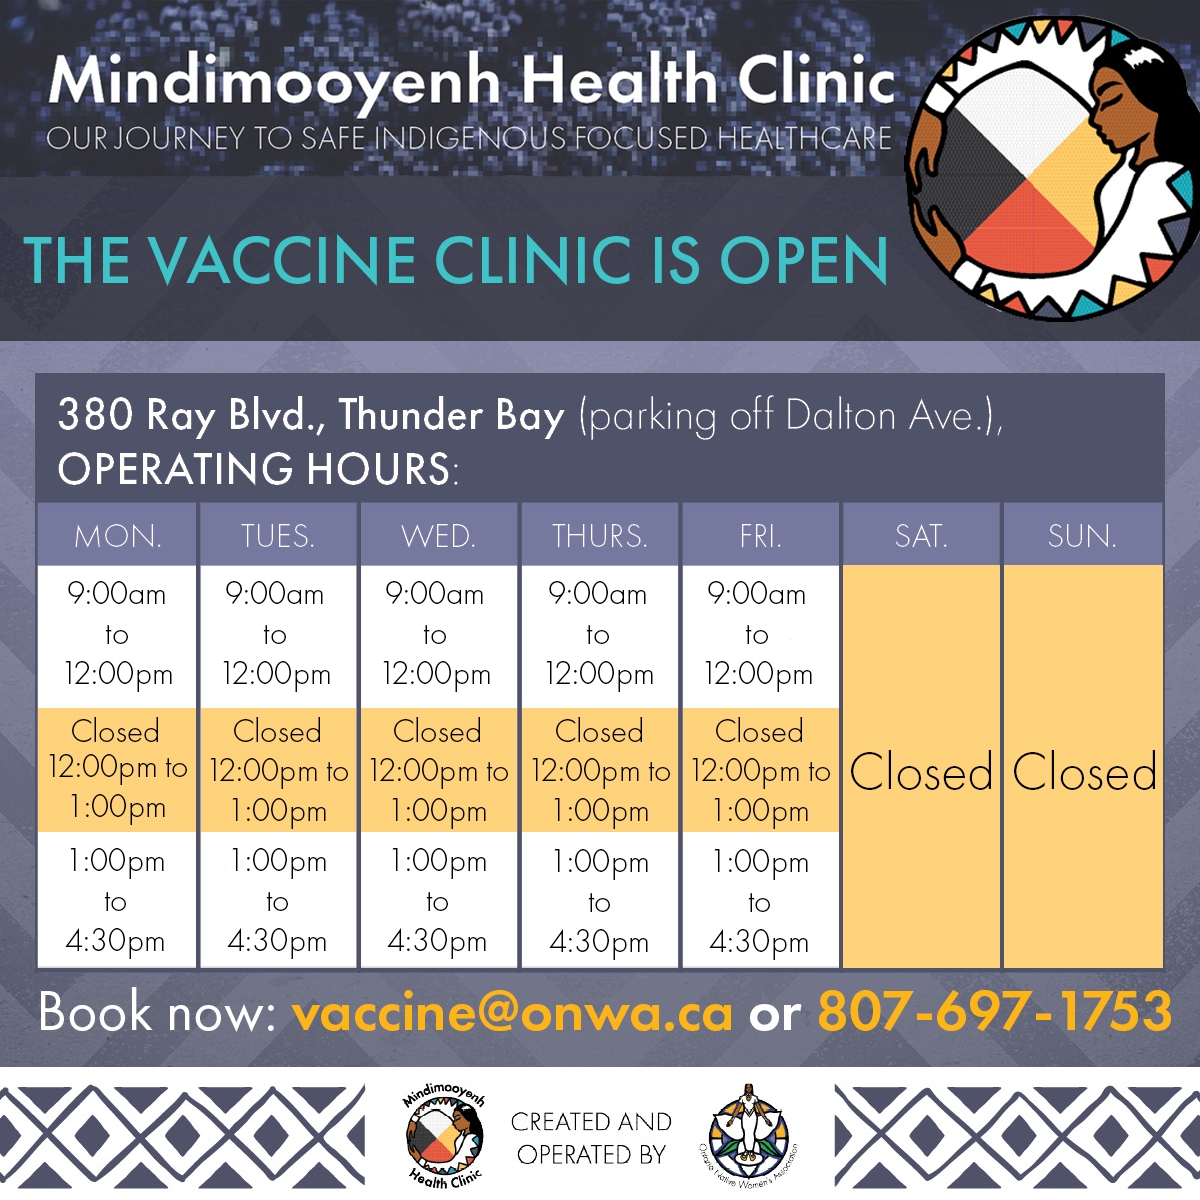 We've updated our hours to serve you better! 🎉 🕛 New Hours: Monday-Friday: 9am-12pm, 1pm-5pm 🥪 Lunch Break: 12pm-1pm Come visit us at Mindimooyenh Health clinic and let us take care of you! Appointments and walk-ins welcome. See you soon! 💙